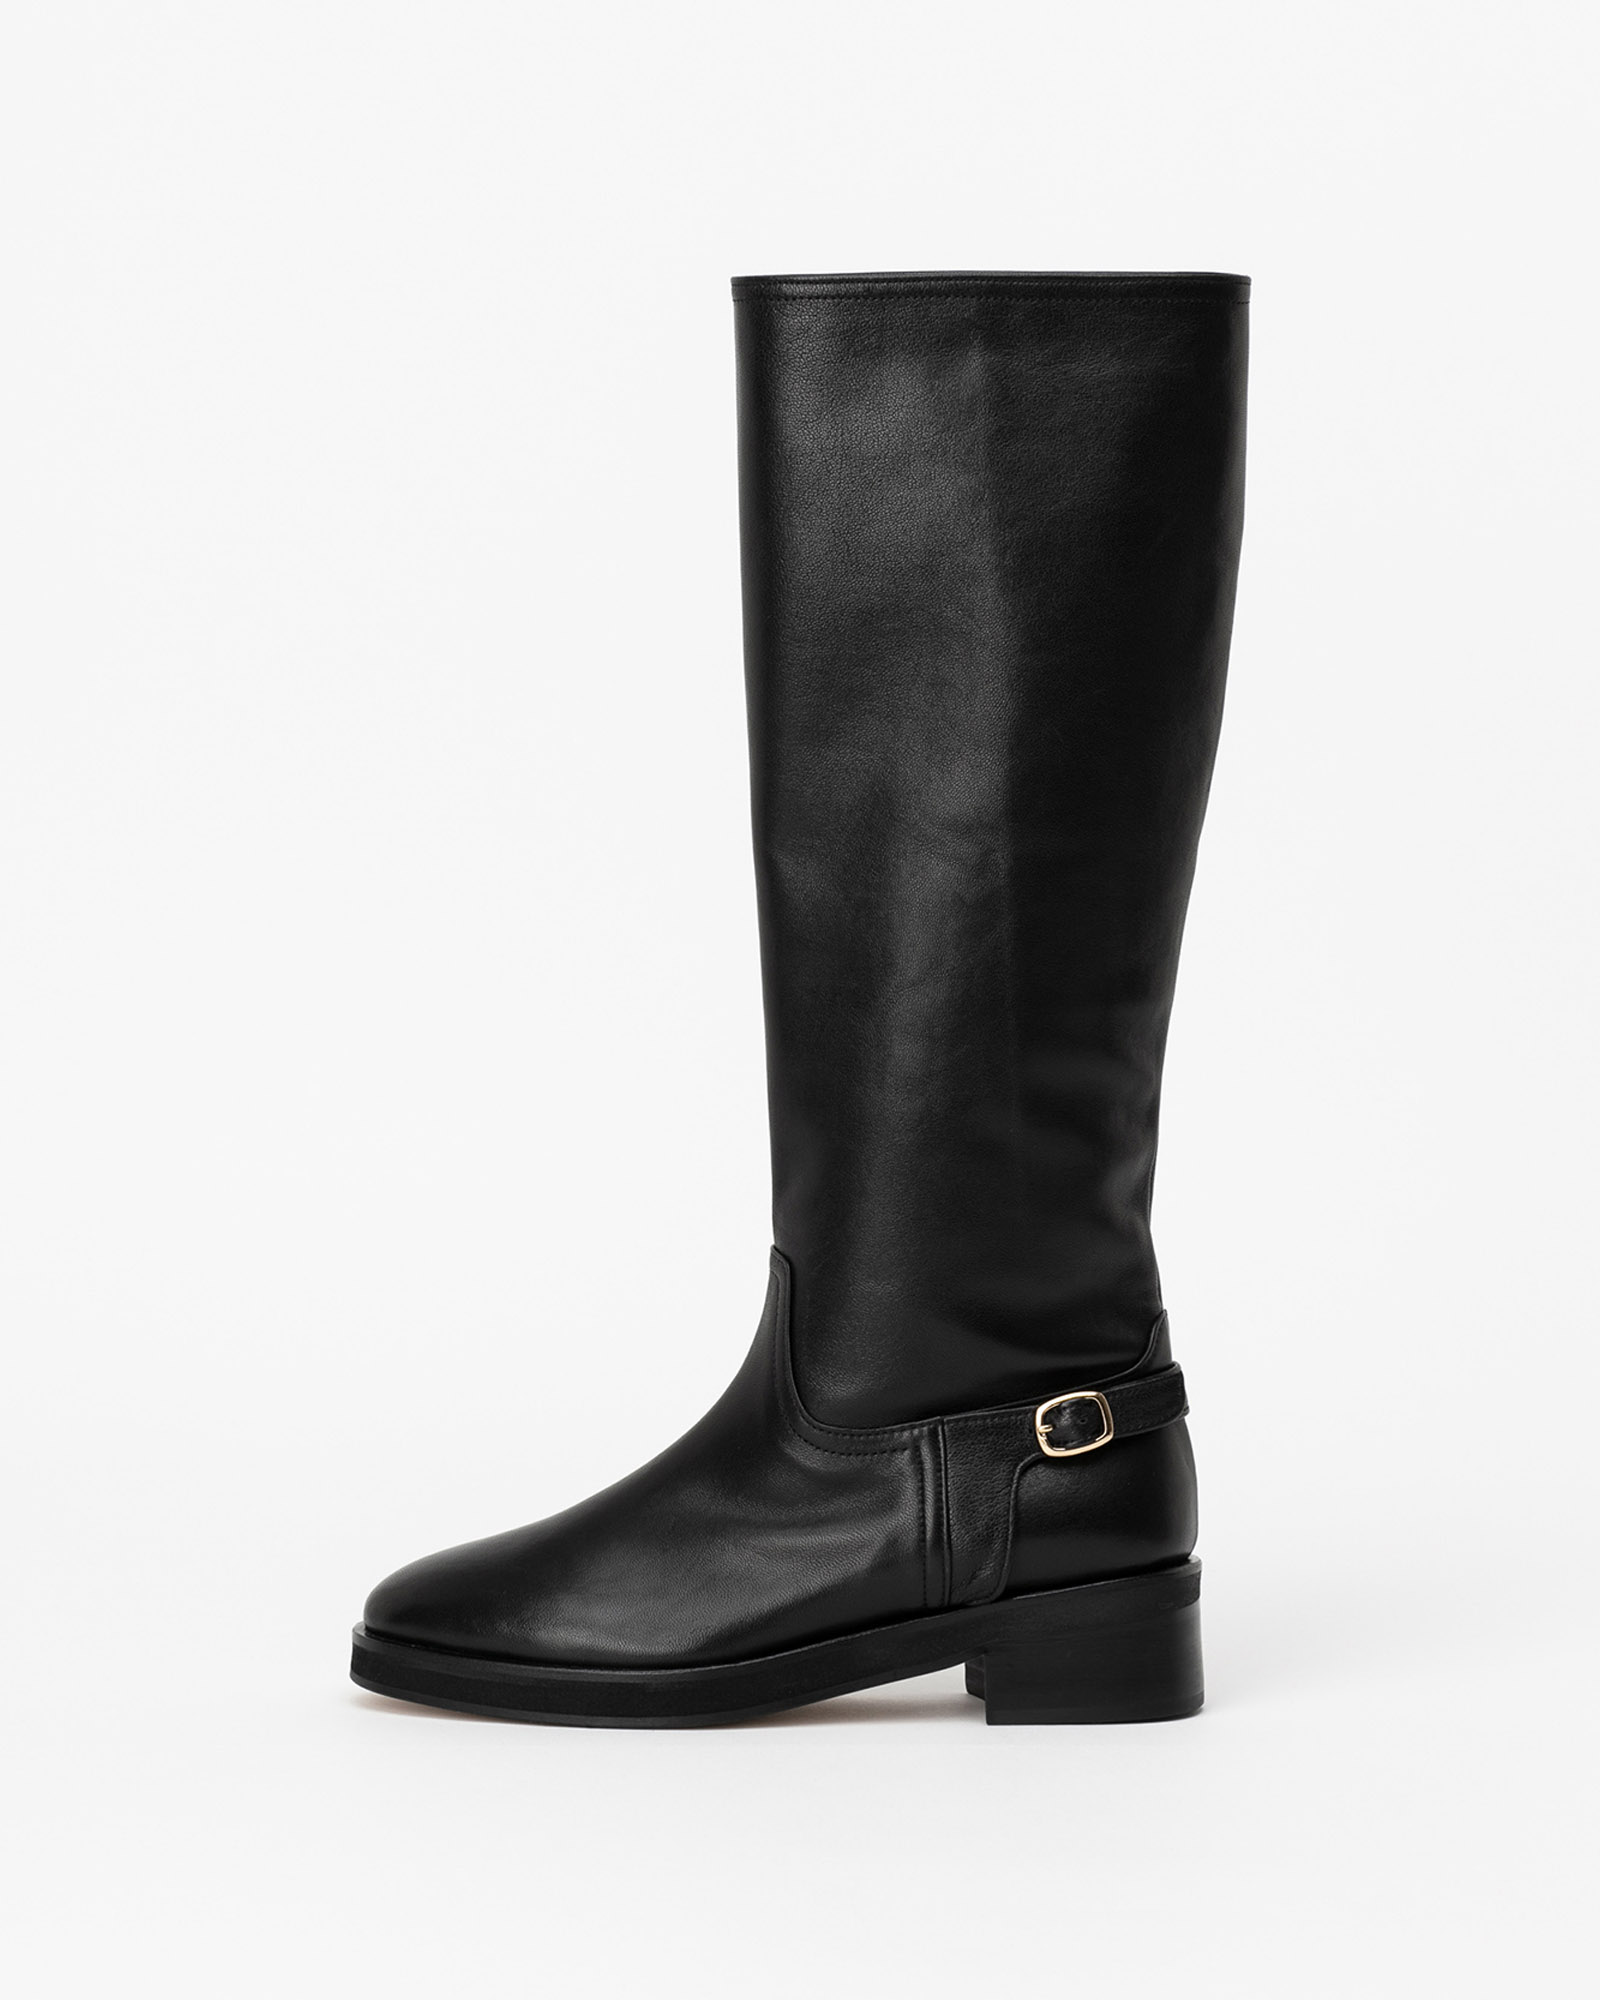 Stalian Riding Boots in Black